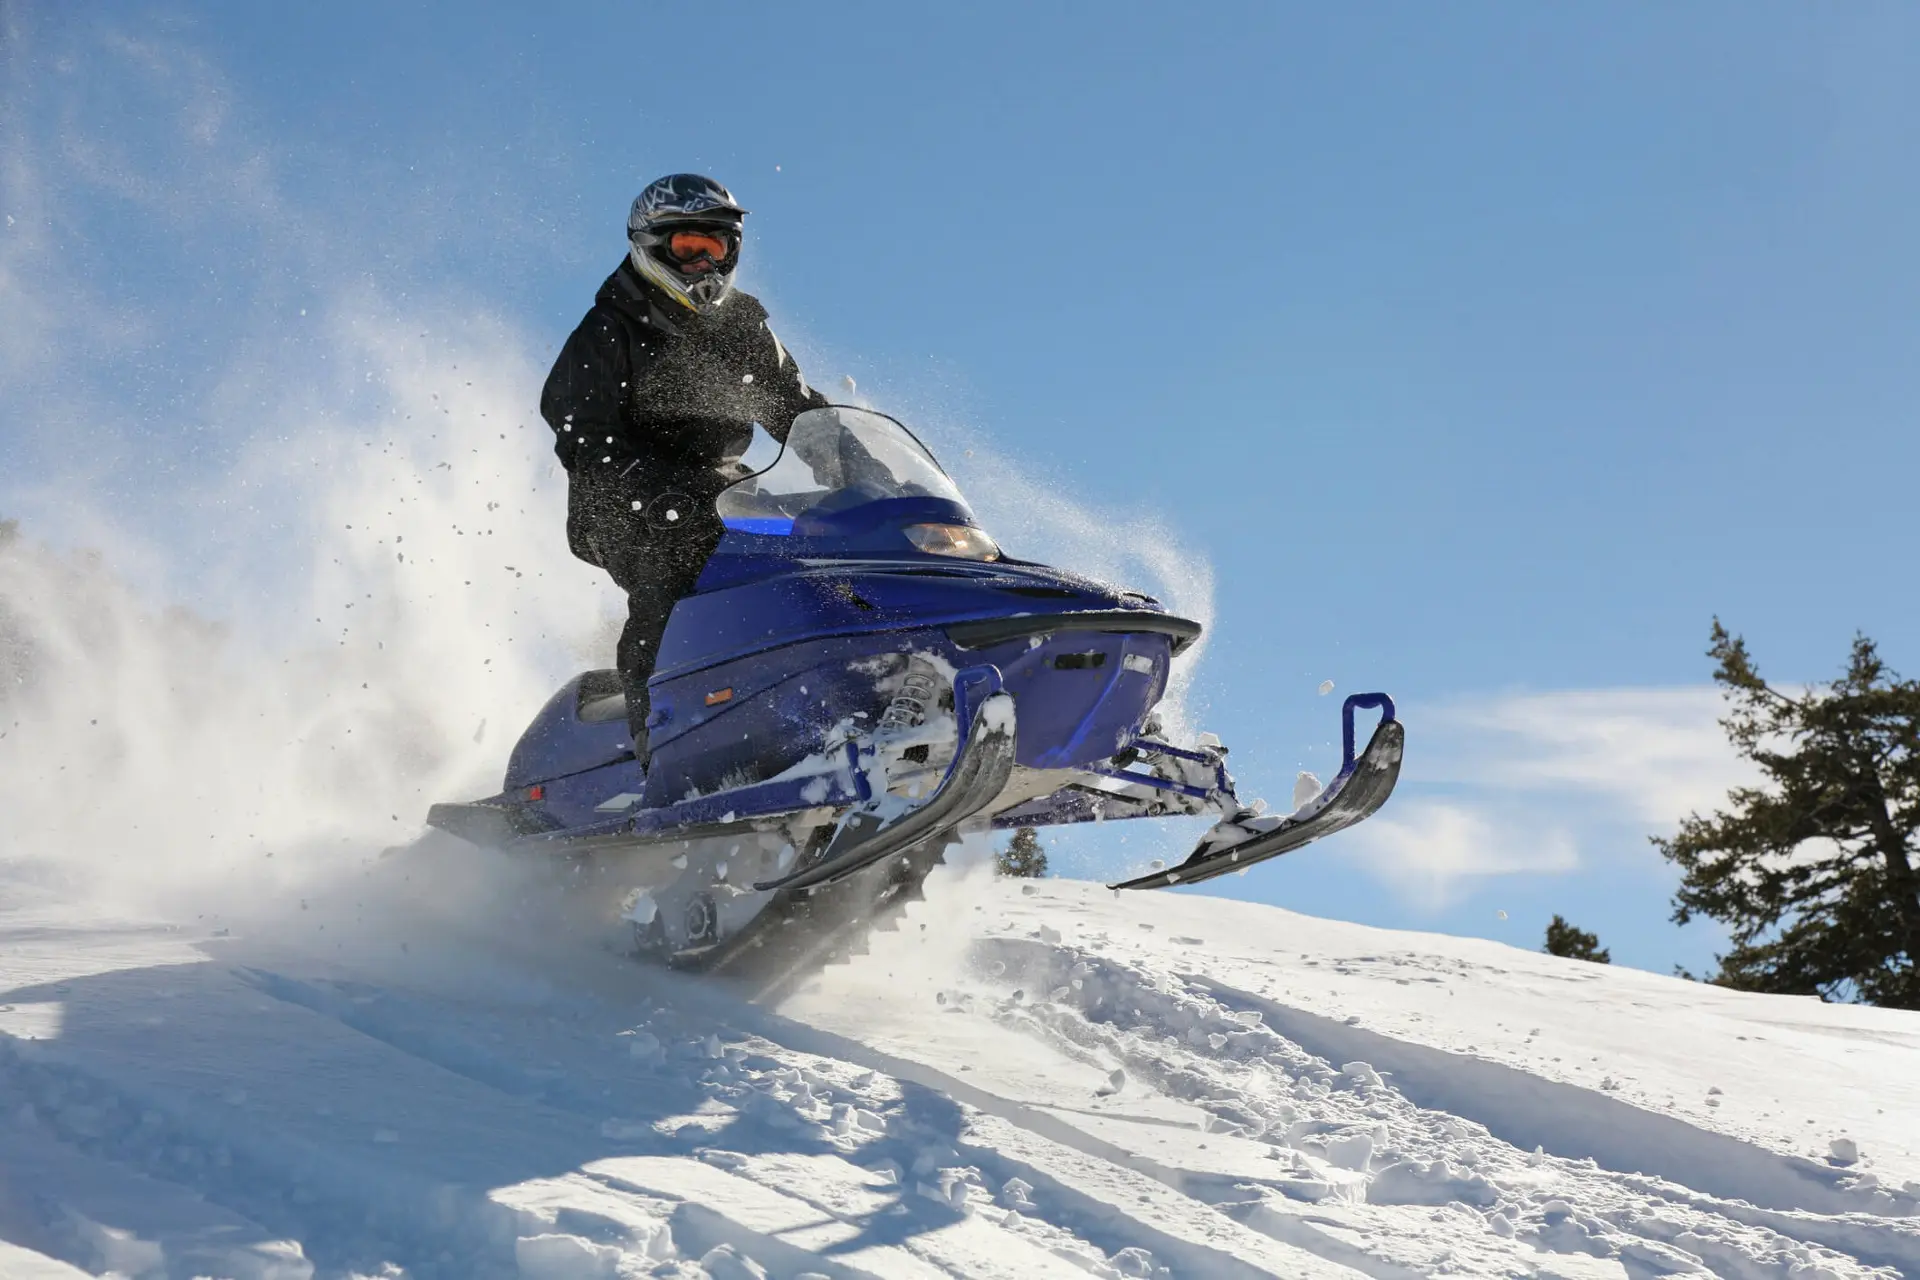 a boy rides a blue snowmobile during the winter on a snowy path on a sunny day